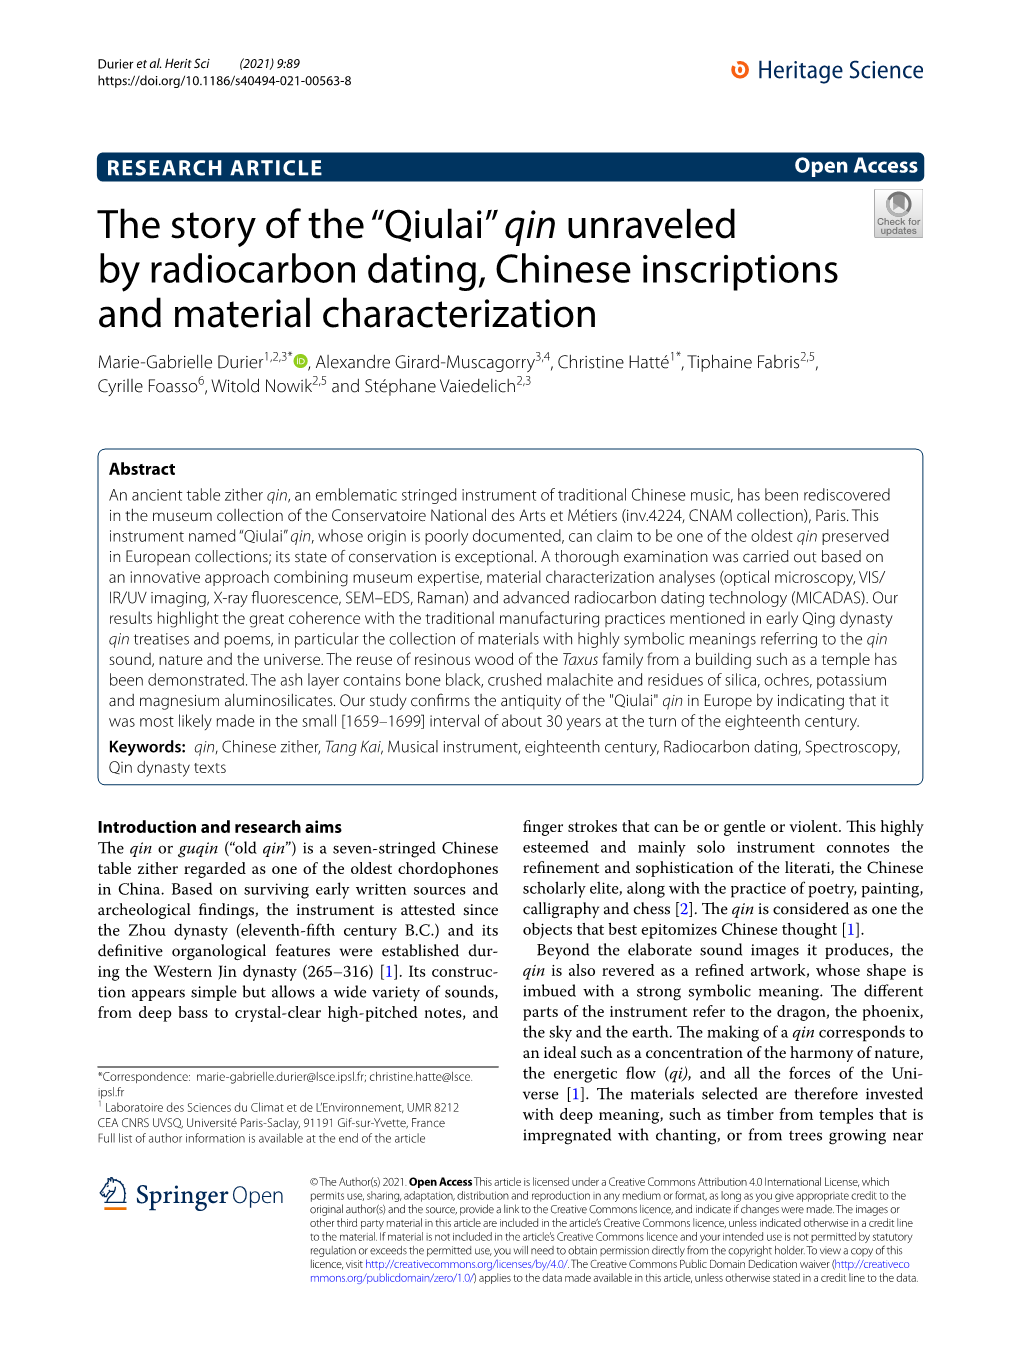 “Qiulai” Qin Unraveled by Radiocarbon Dating, Chinese Inscriptions And